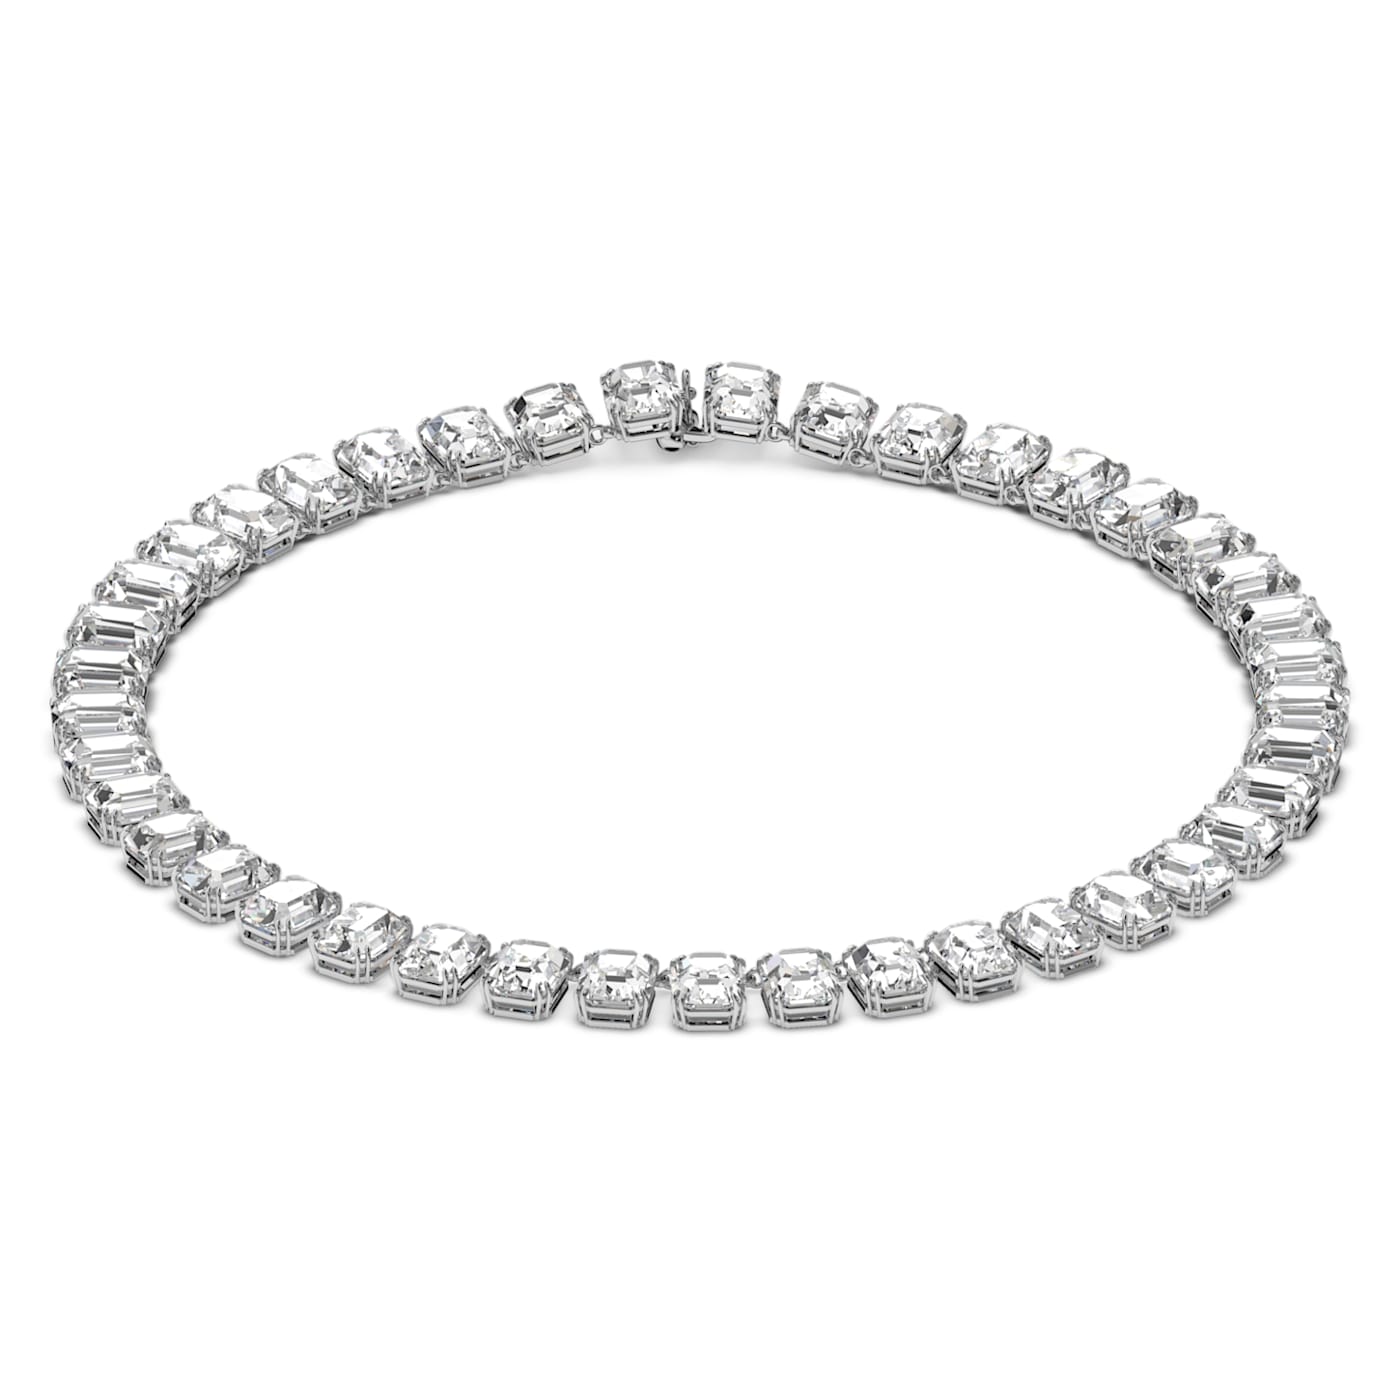 MILLENIA ALL AROUND NECKLACE, OCTAGON CUT CRYSTALS, WHITE, RHODIUM PLATED